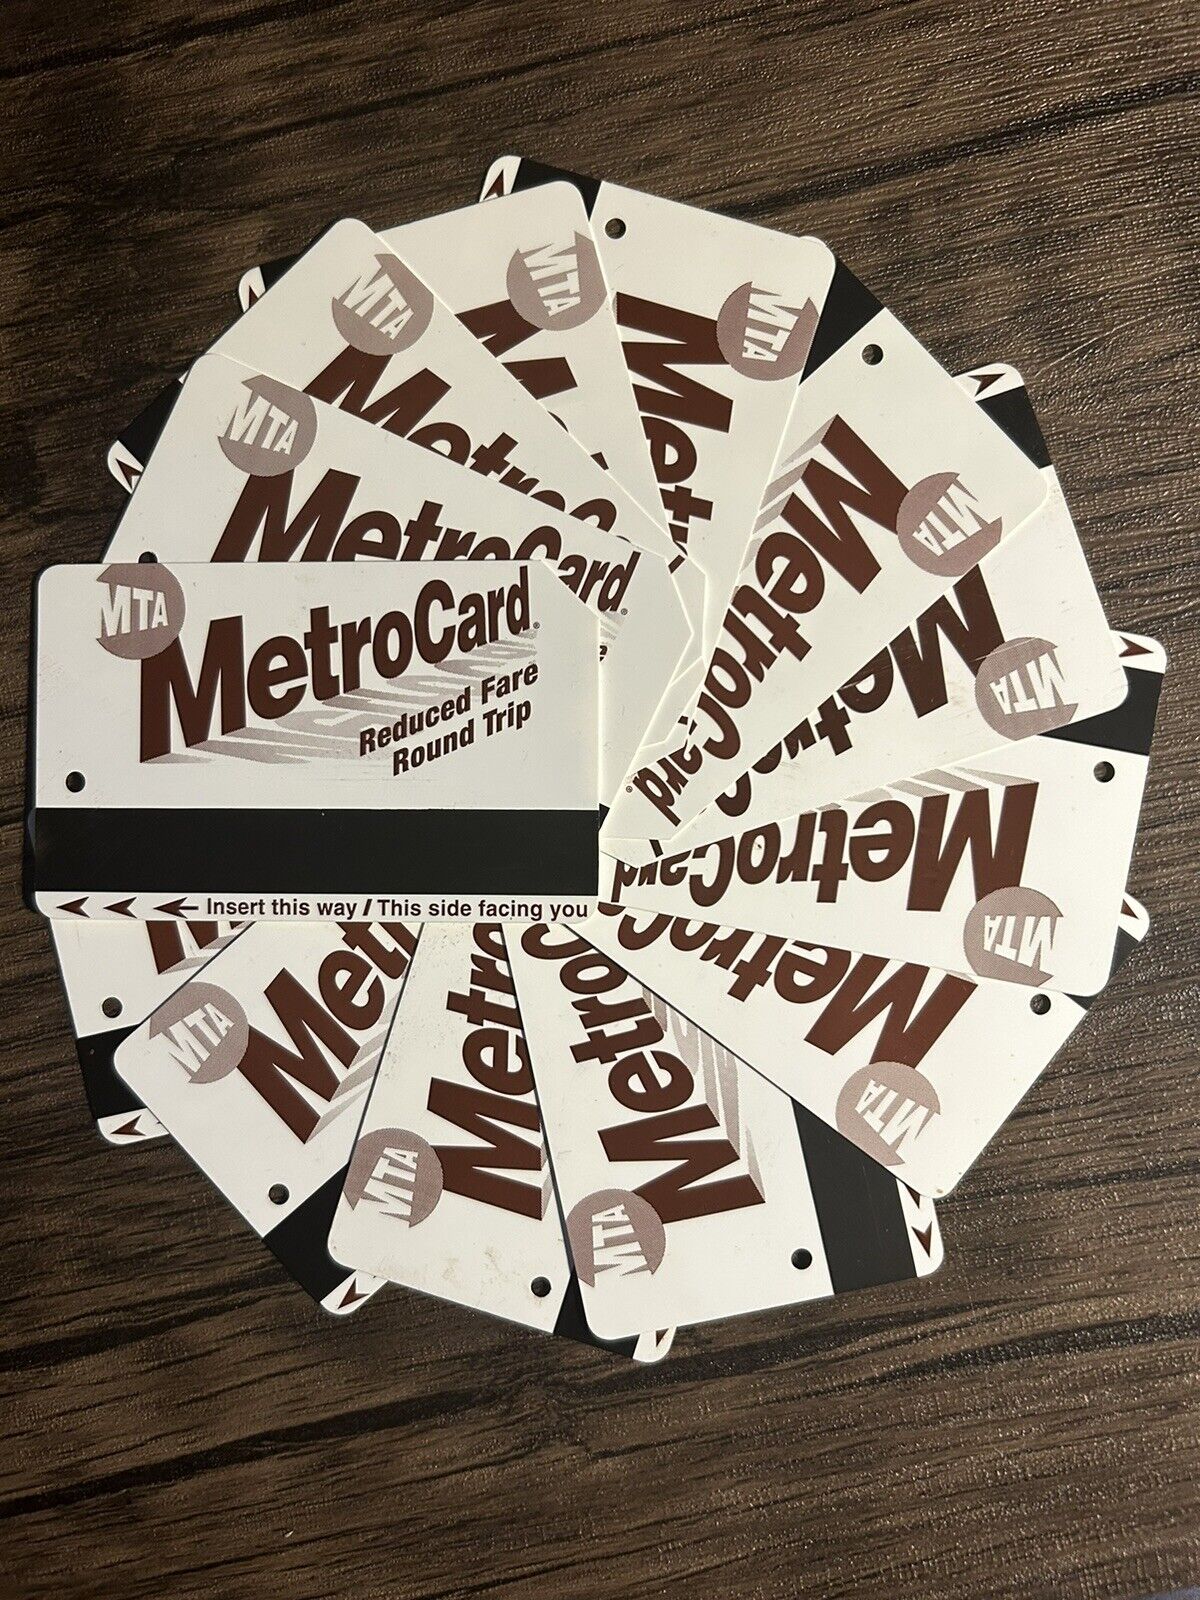 100 NYC METROCARDS - Best for Cell Phone Repair (White Version)